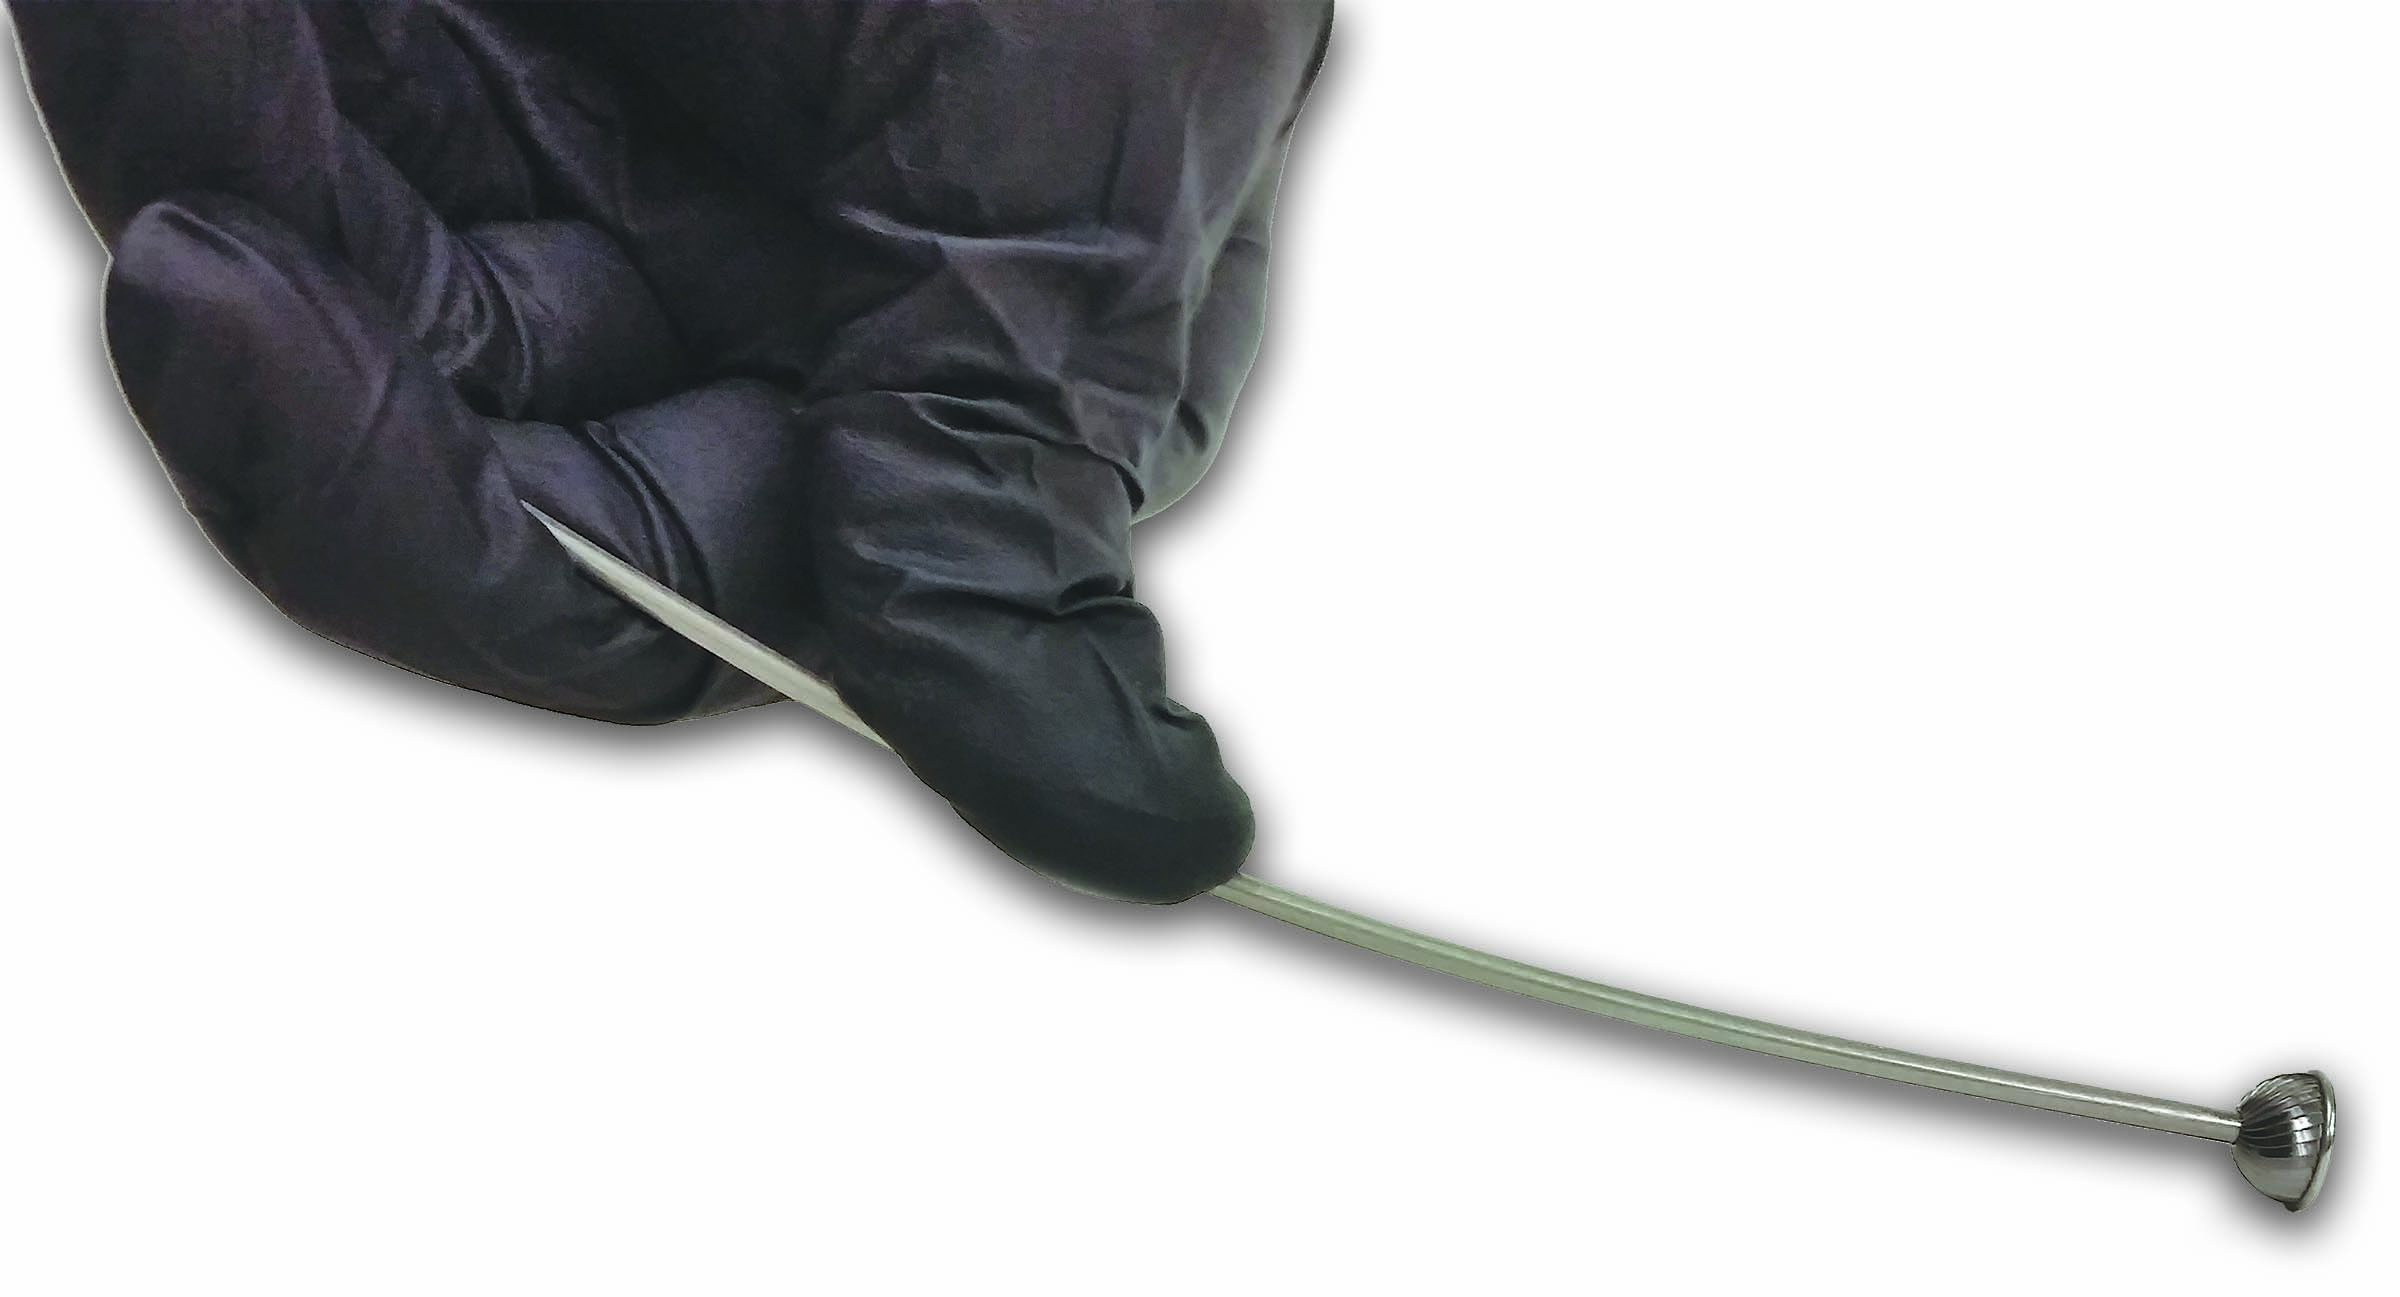 Orbitool’s flexible shaft allows a user to bend and pre-load the tool.